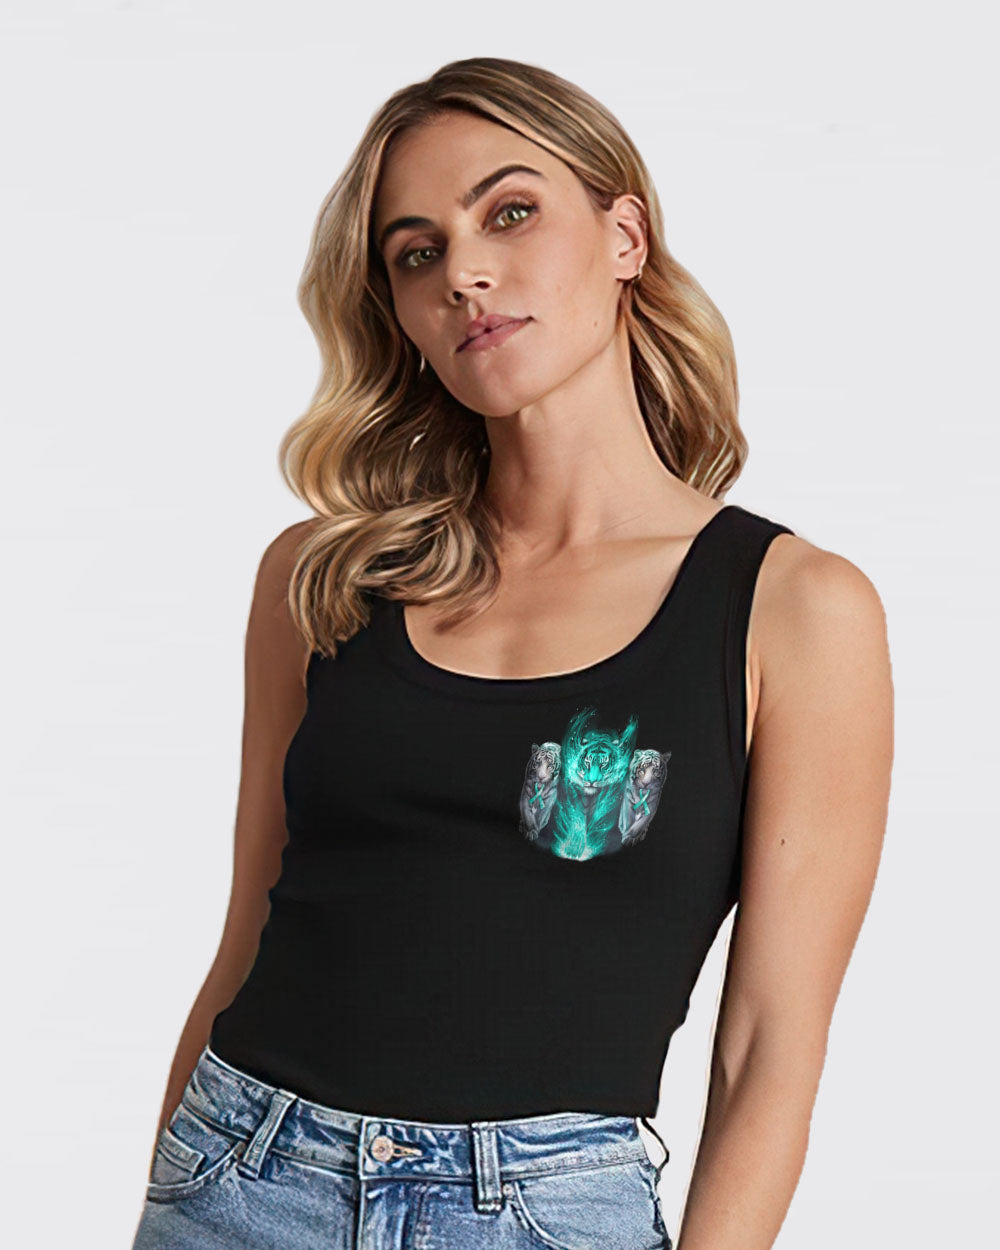 No One Fights Alone Tiger Women's Ovarian Cancer Awareness Tanks